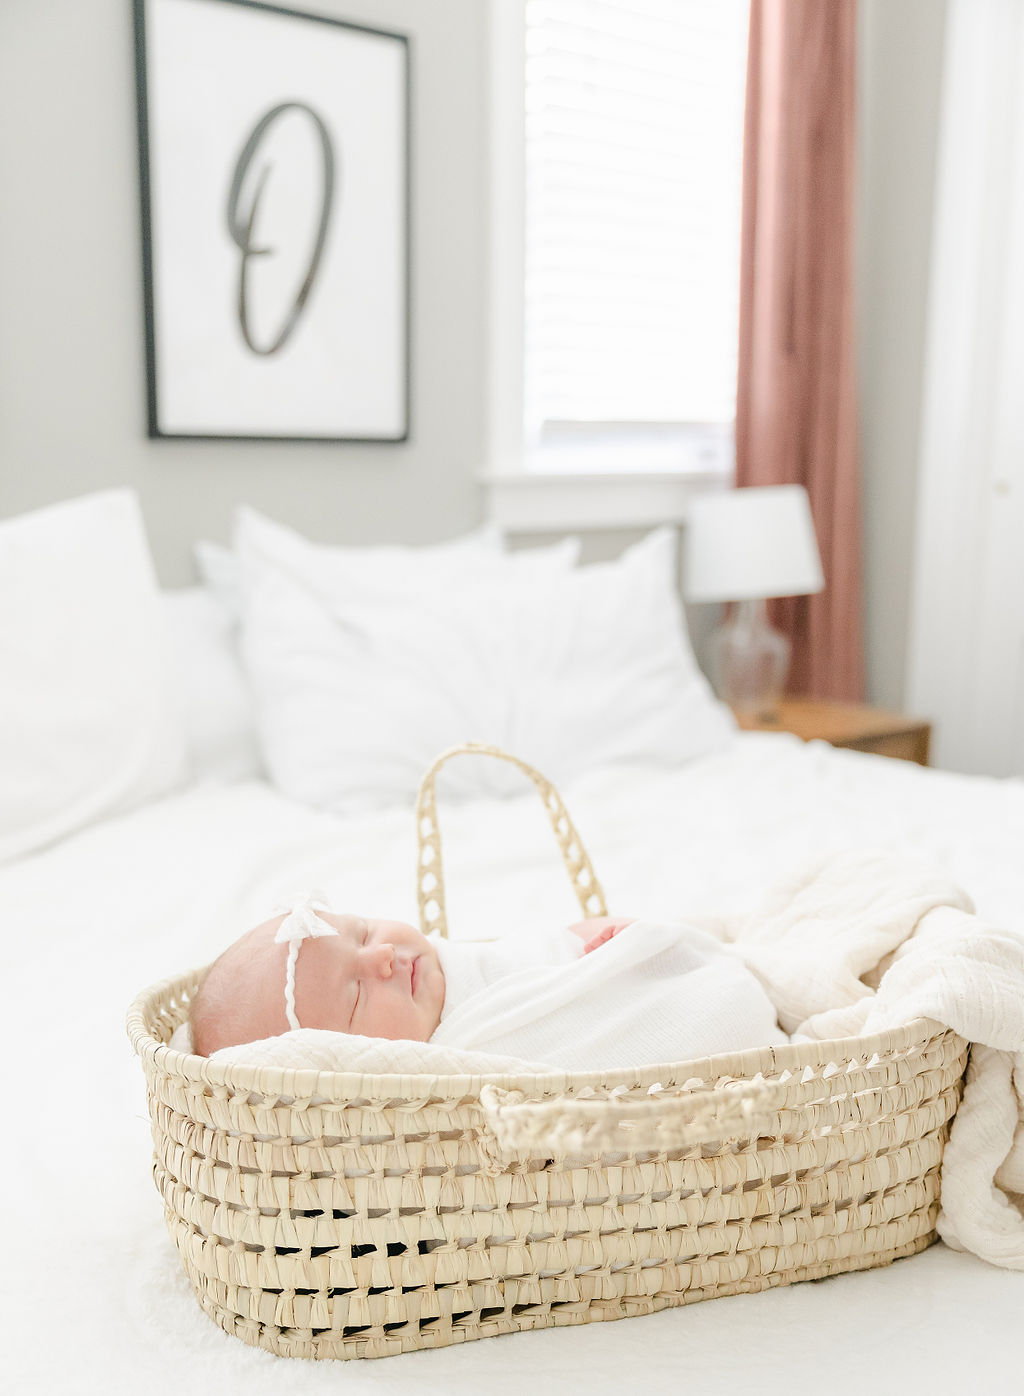 A newborn baby sleeps in a white blanket in a woven basket on a bed